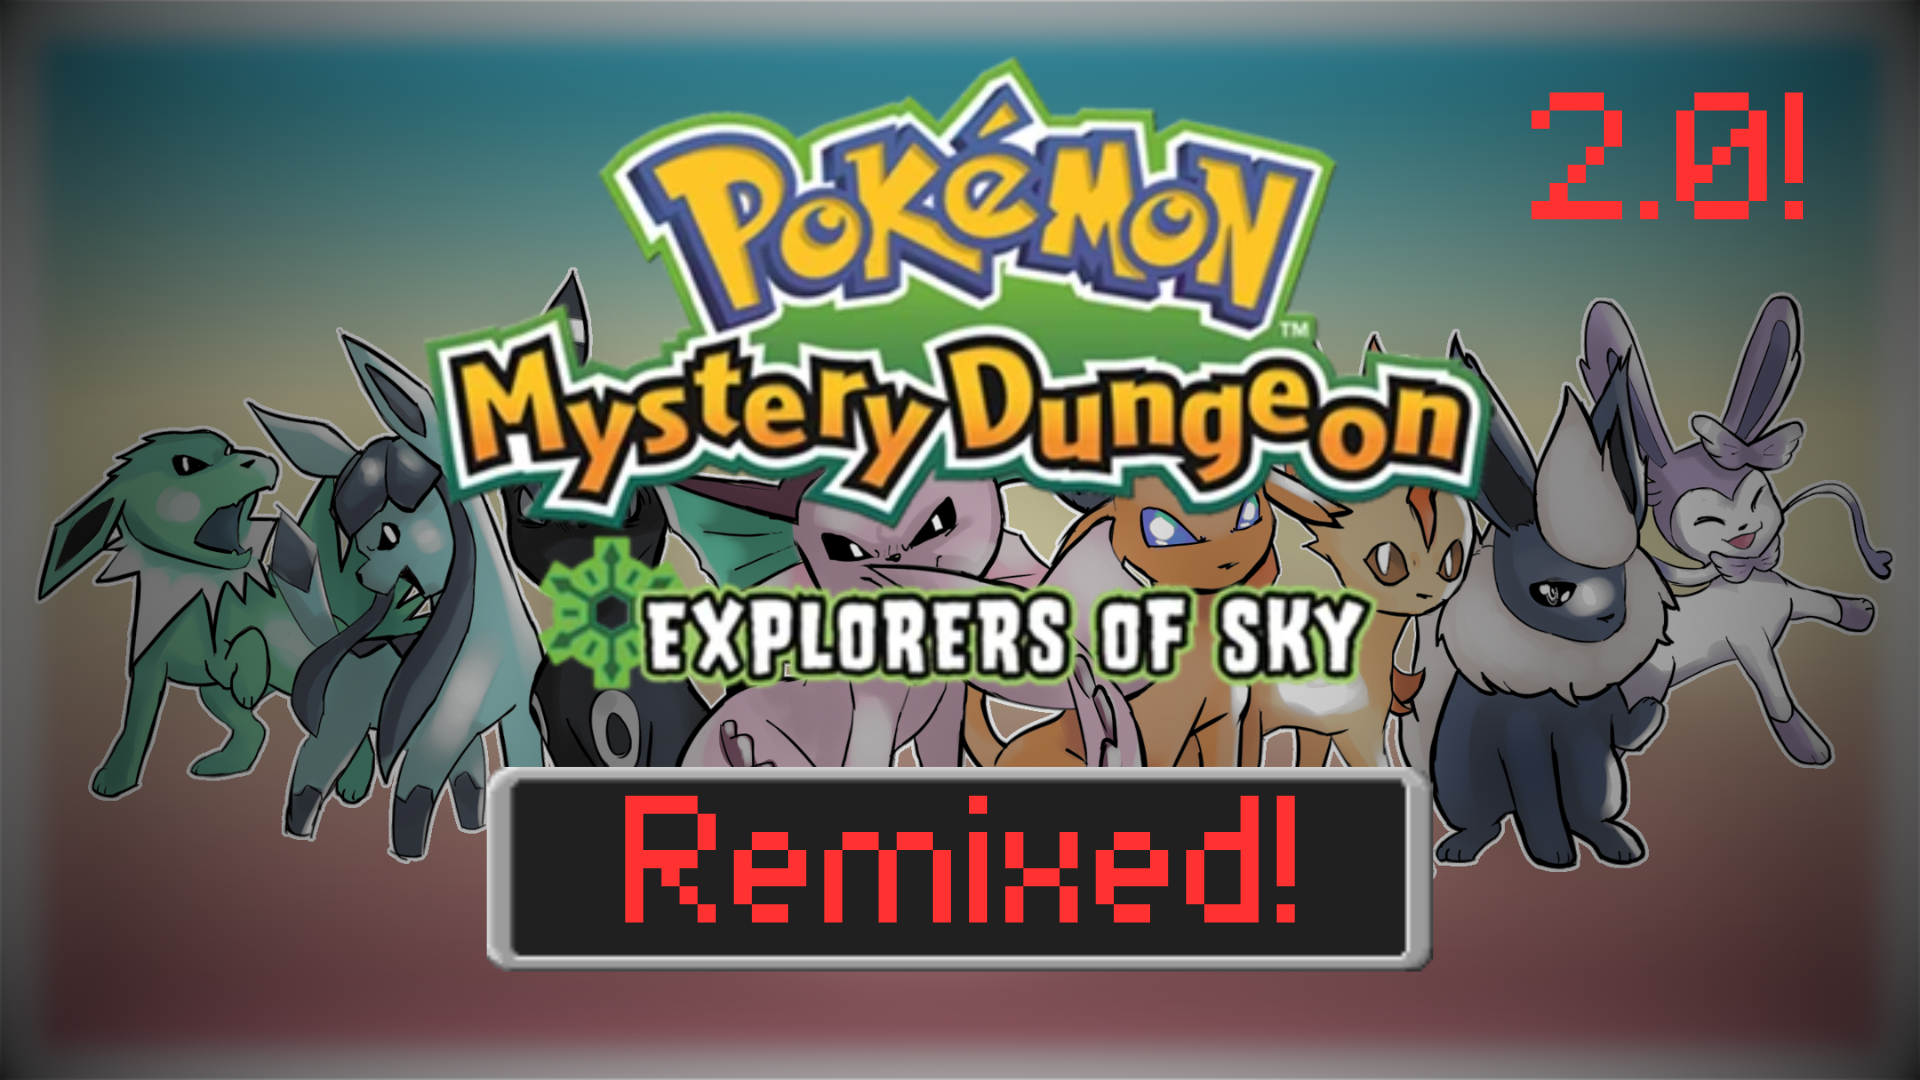 More information about "Pokémon Mystery Dungeon Explorers of Sky: Remixed!"